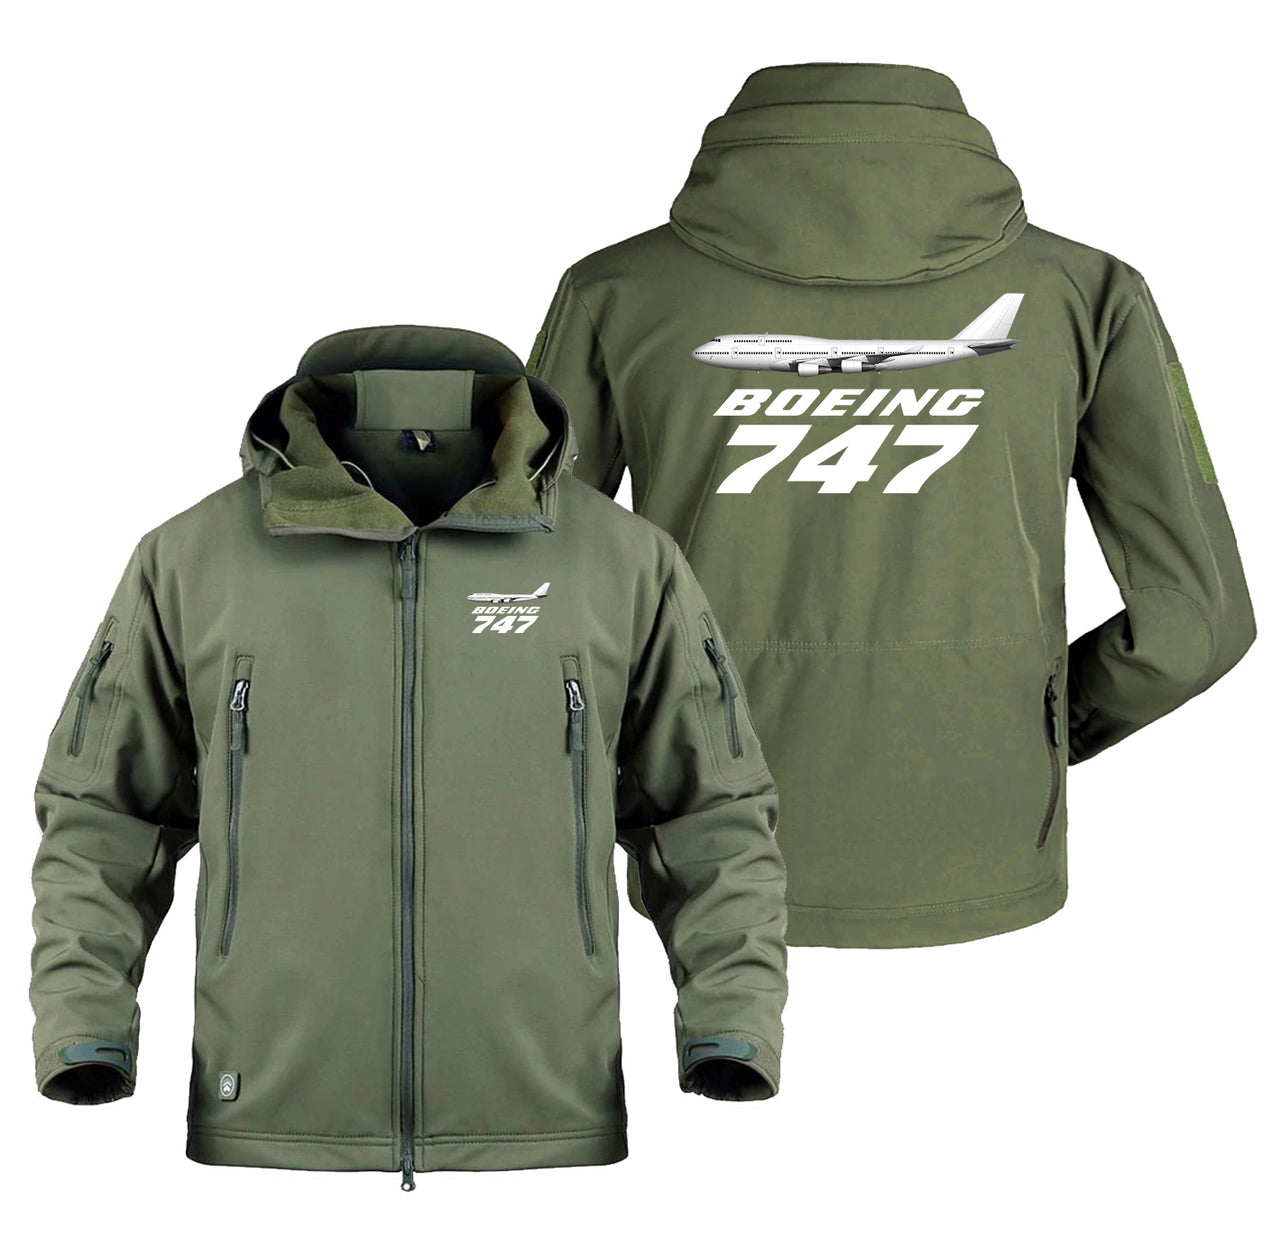 The Boeing 747 Designed Military Jackets (Customizable)